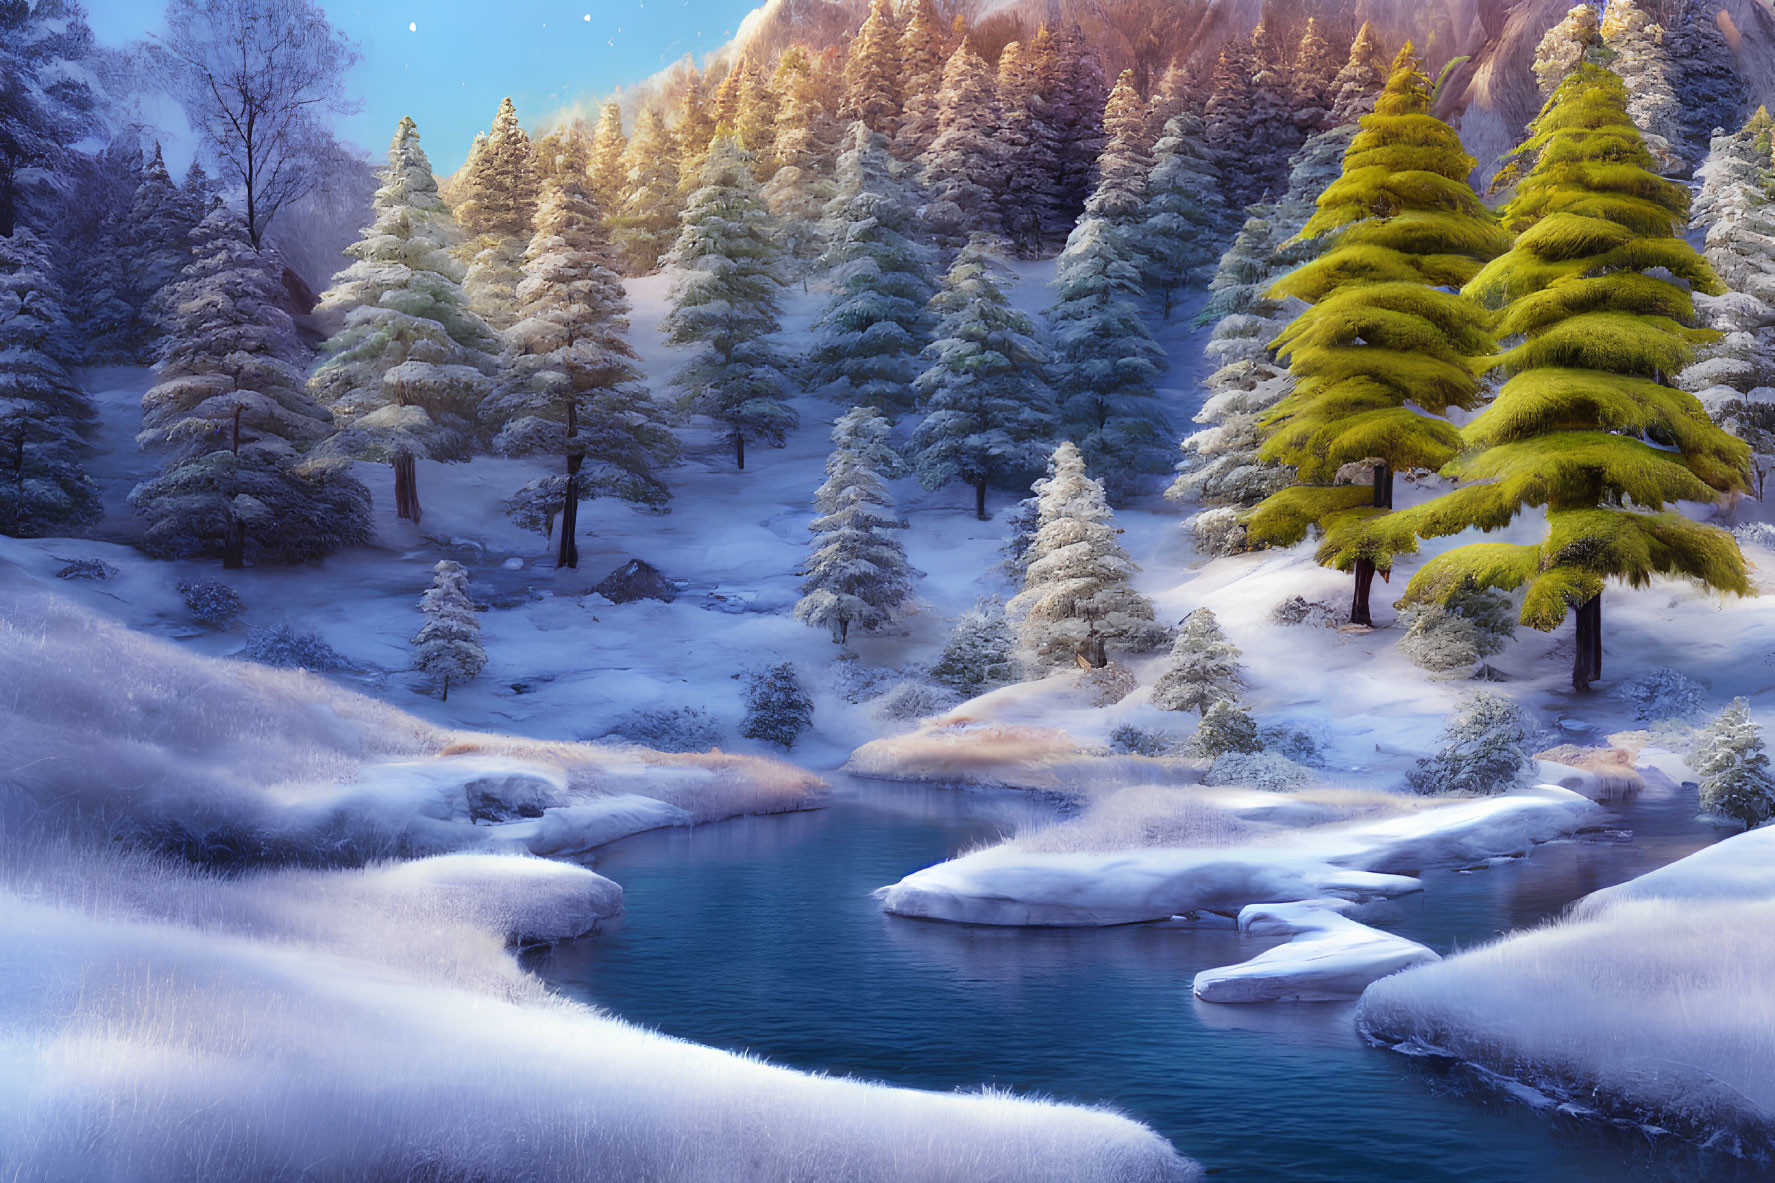 Snow-covered trees, river, and mountain in serene winter landscape